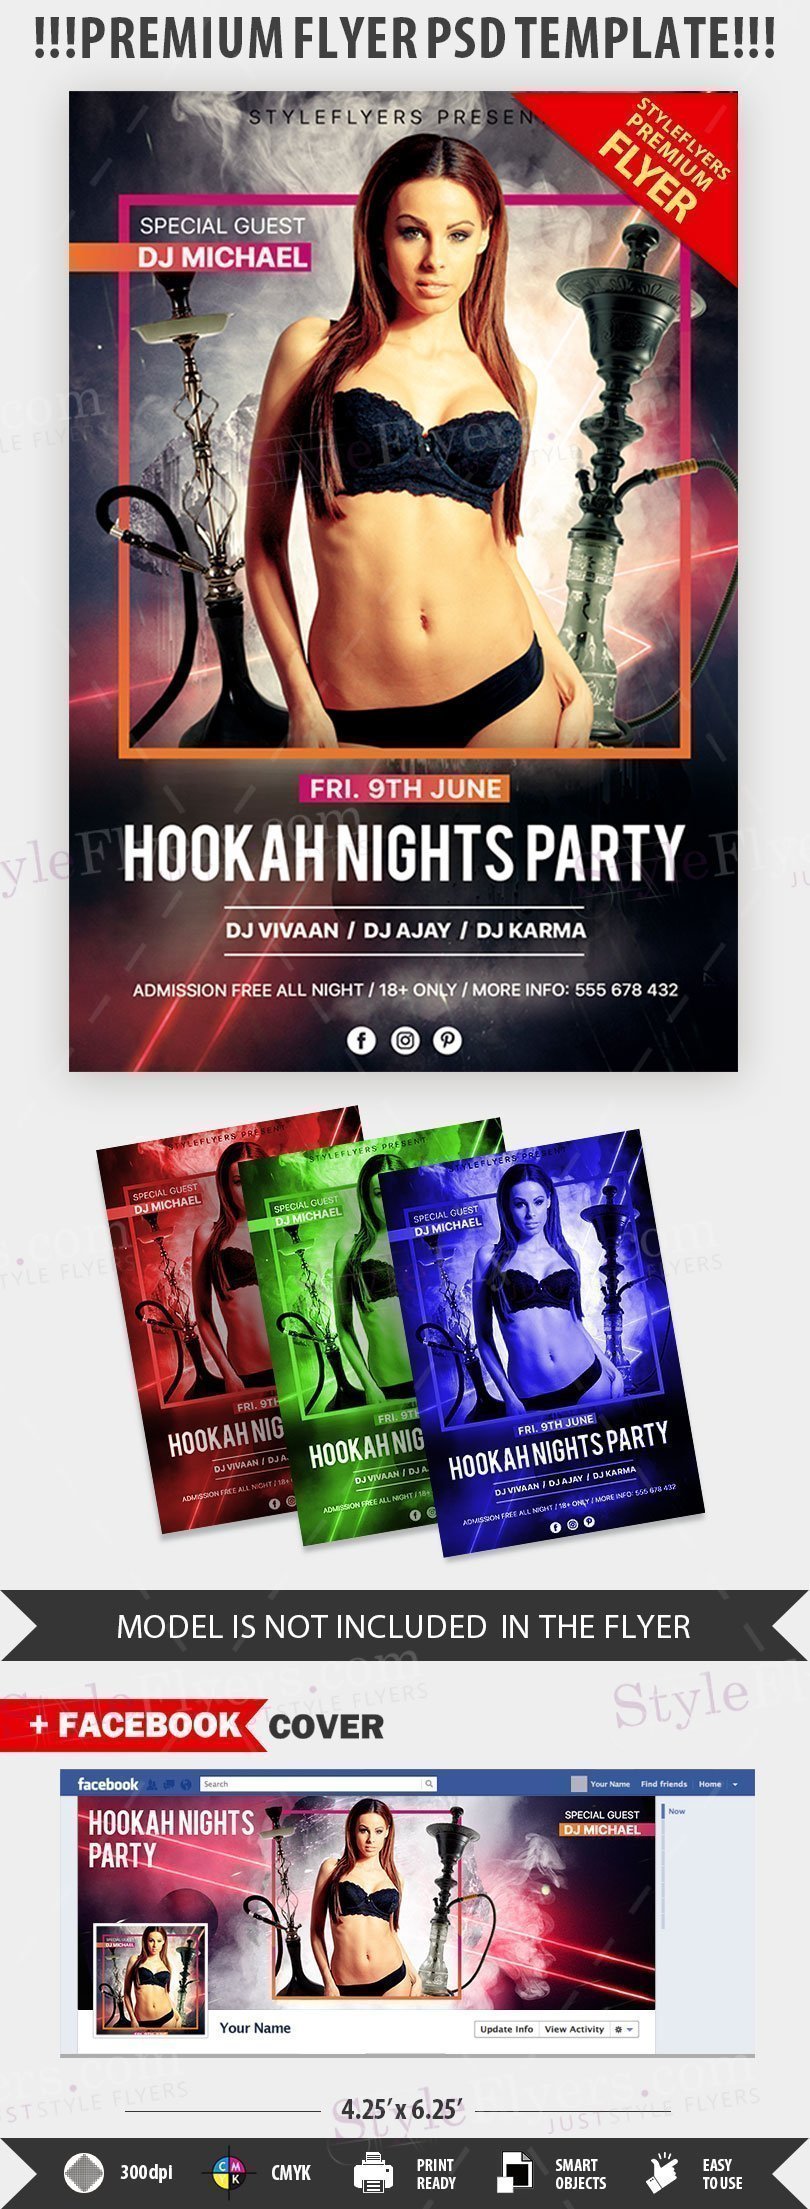 preview_Hookah Nights Party_psd_flyer